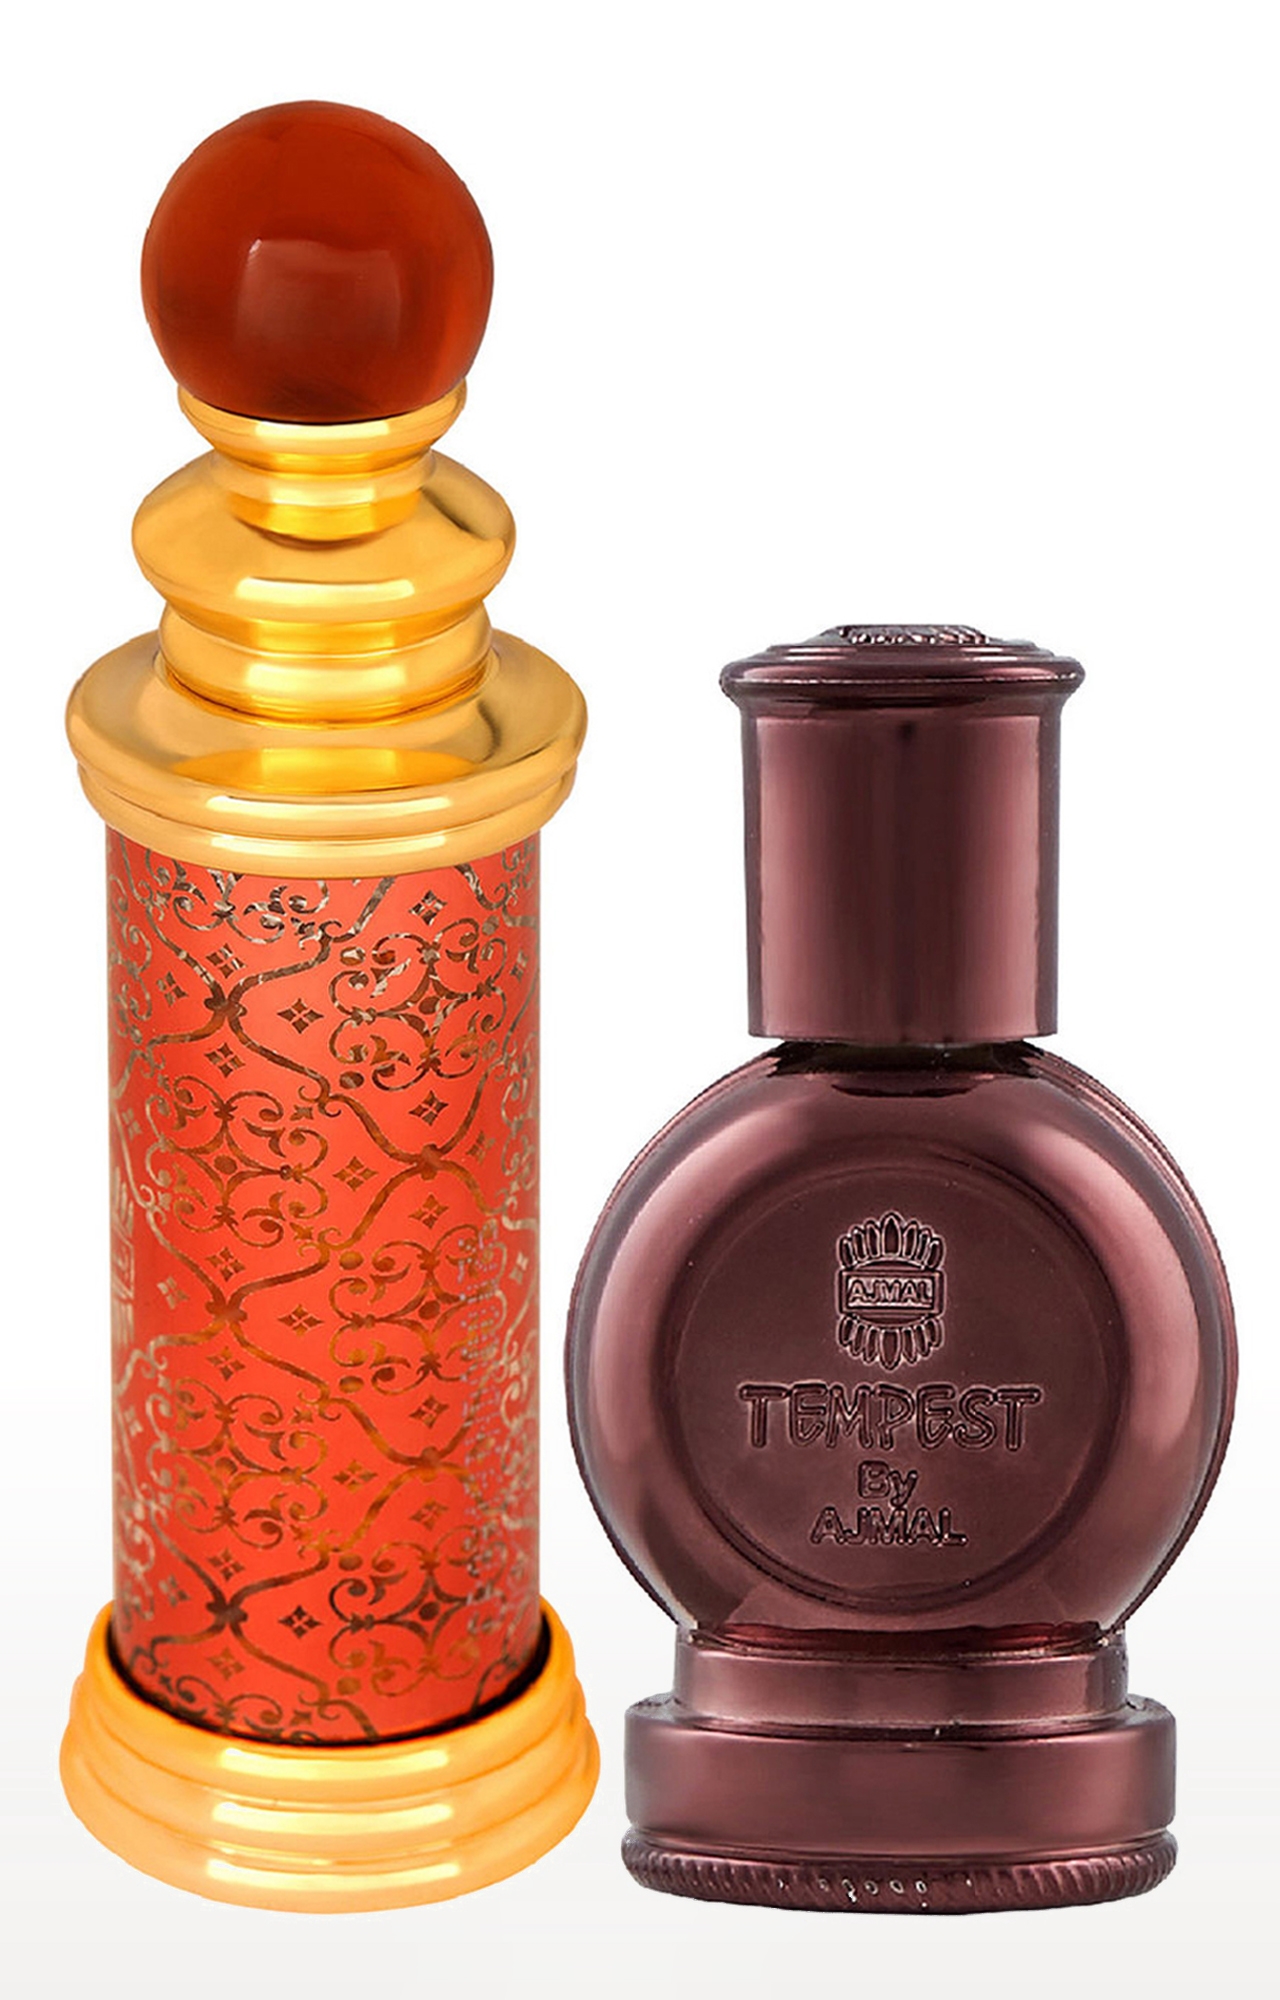 Ajmal Classic Oud Concentrated Perfume Oil Oudh Alcohol-free Attar 10ml for Unisex and Tempest Concentrated Perfume Oil Alcohol-free Attar 12ml for Unisex